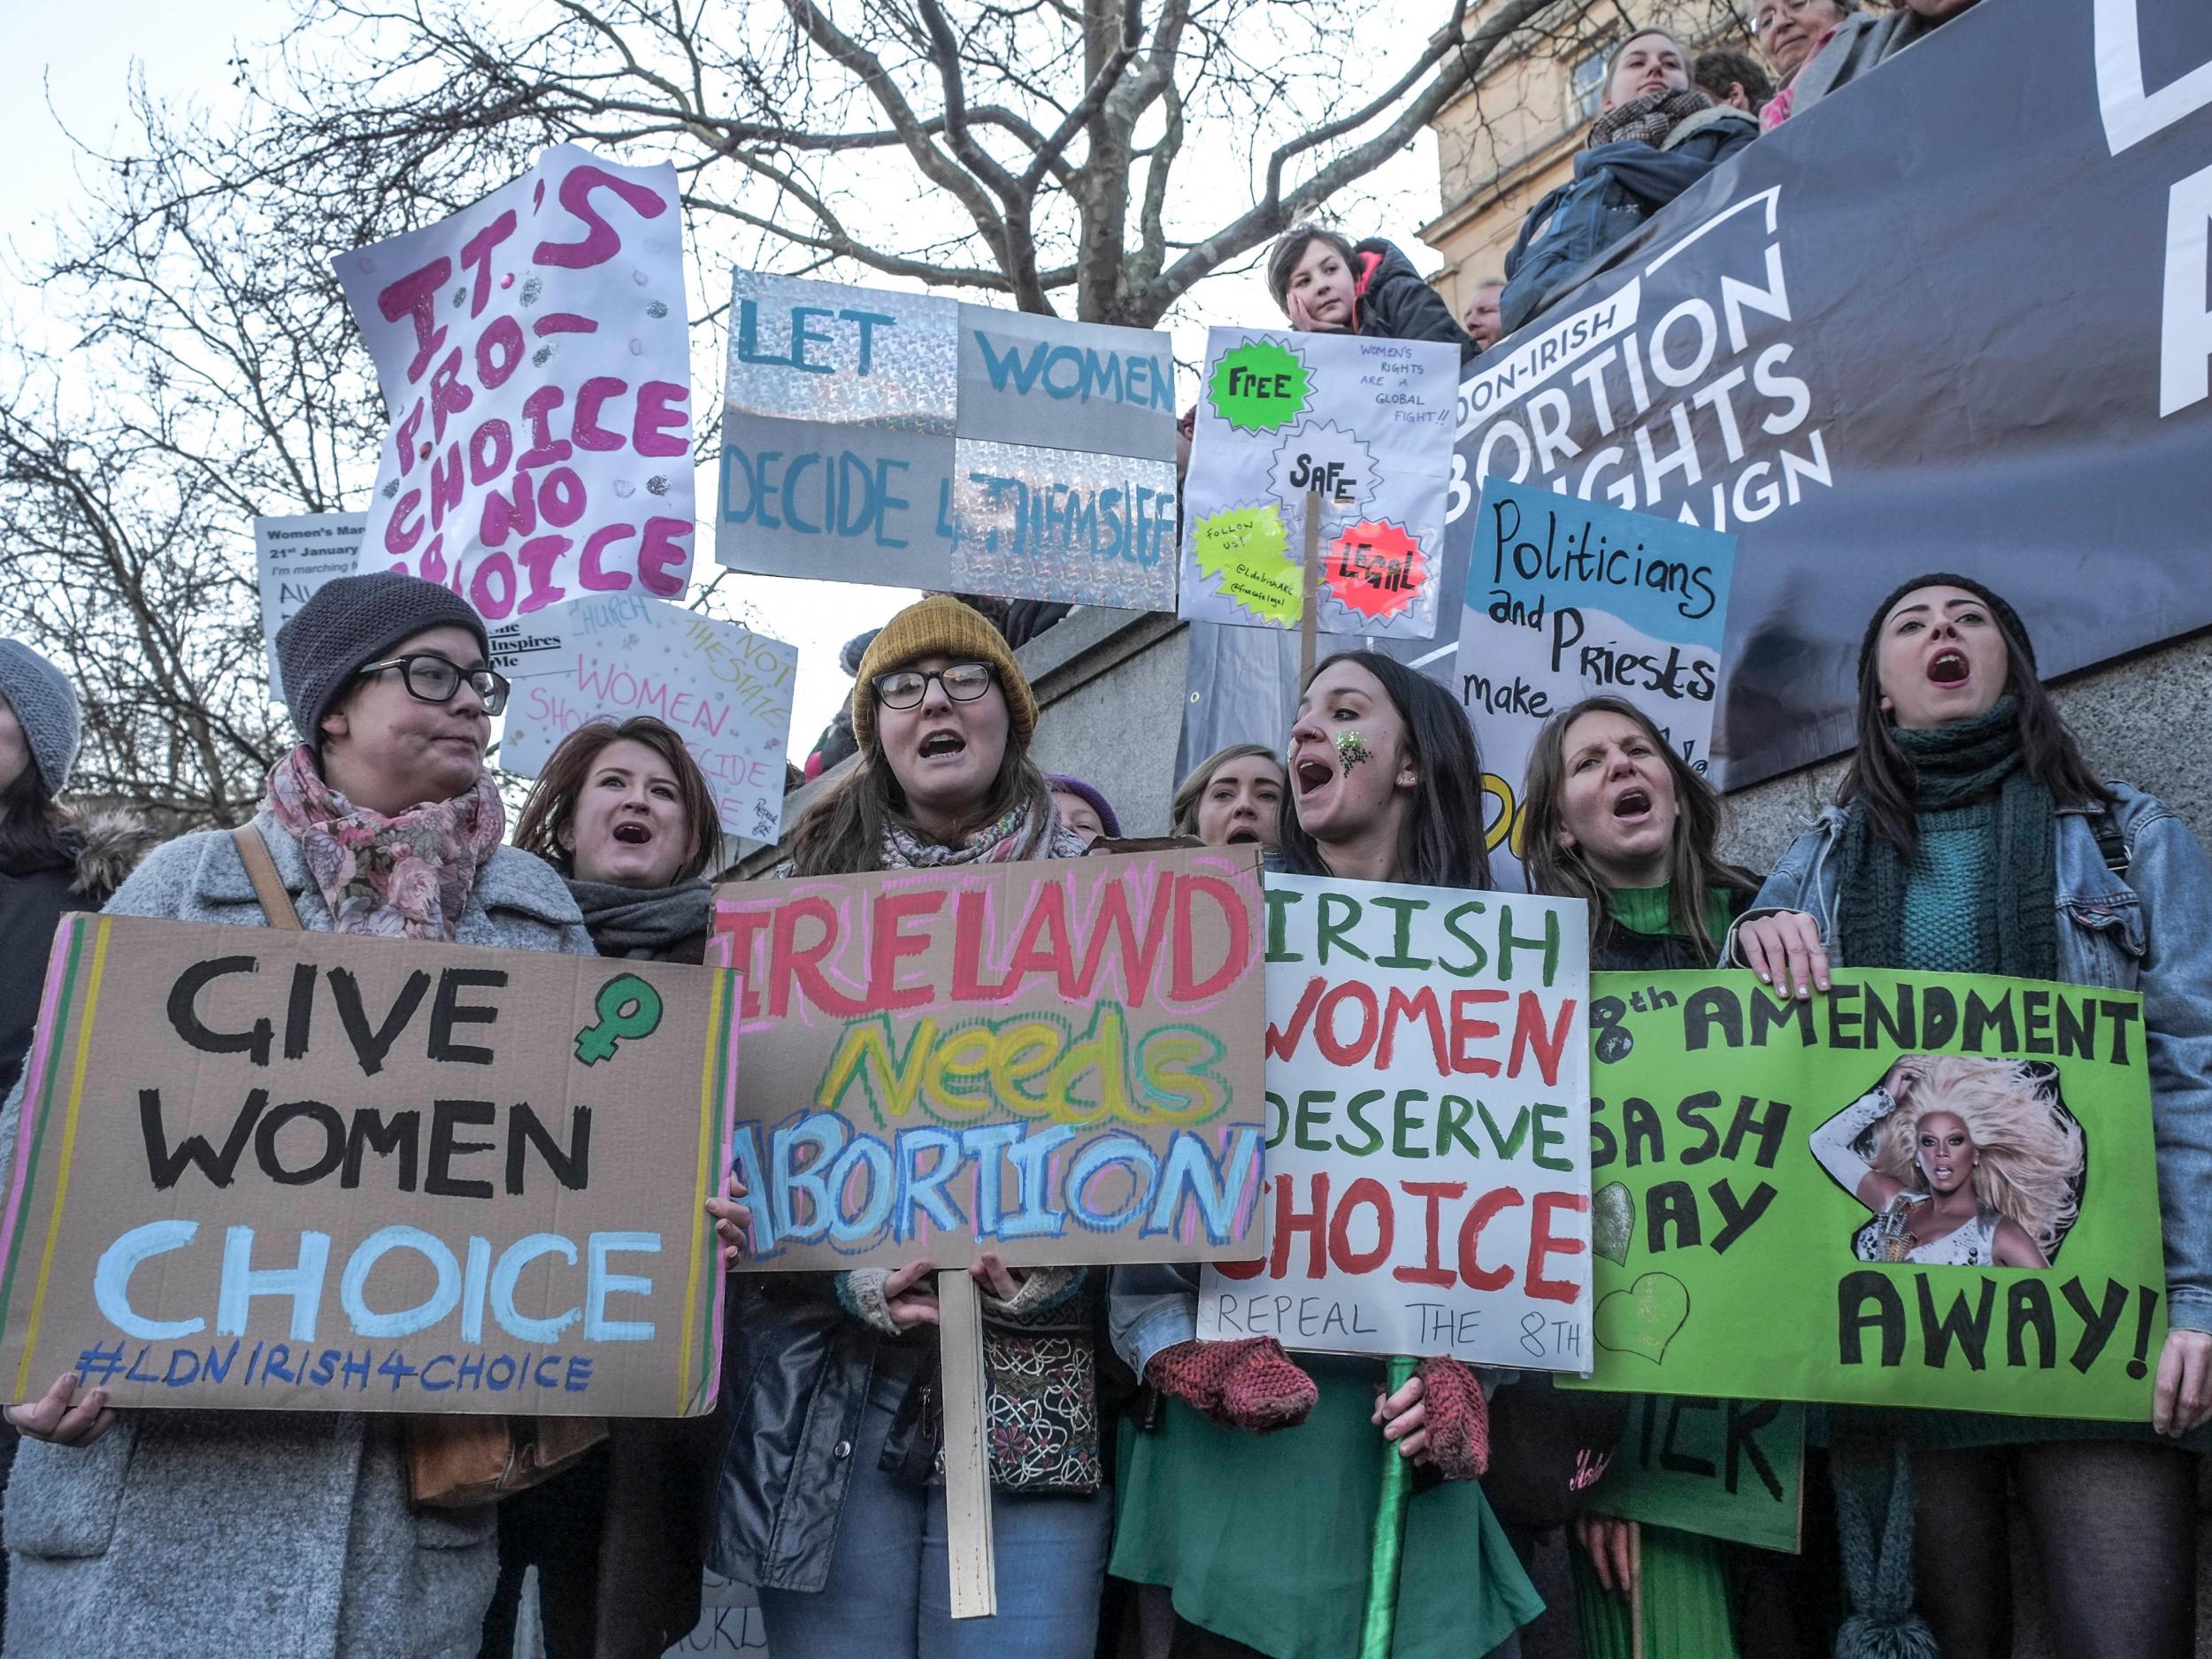 For Irish women, it's not just abortion rights that are on the ballot ...